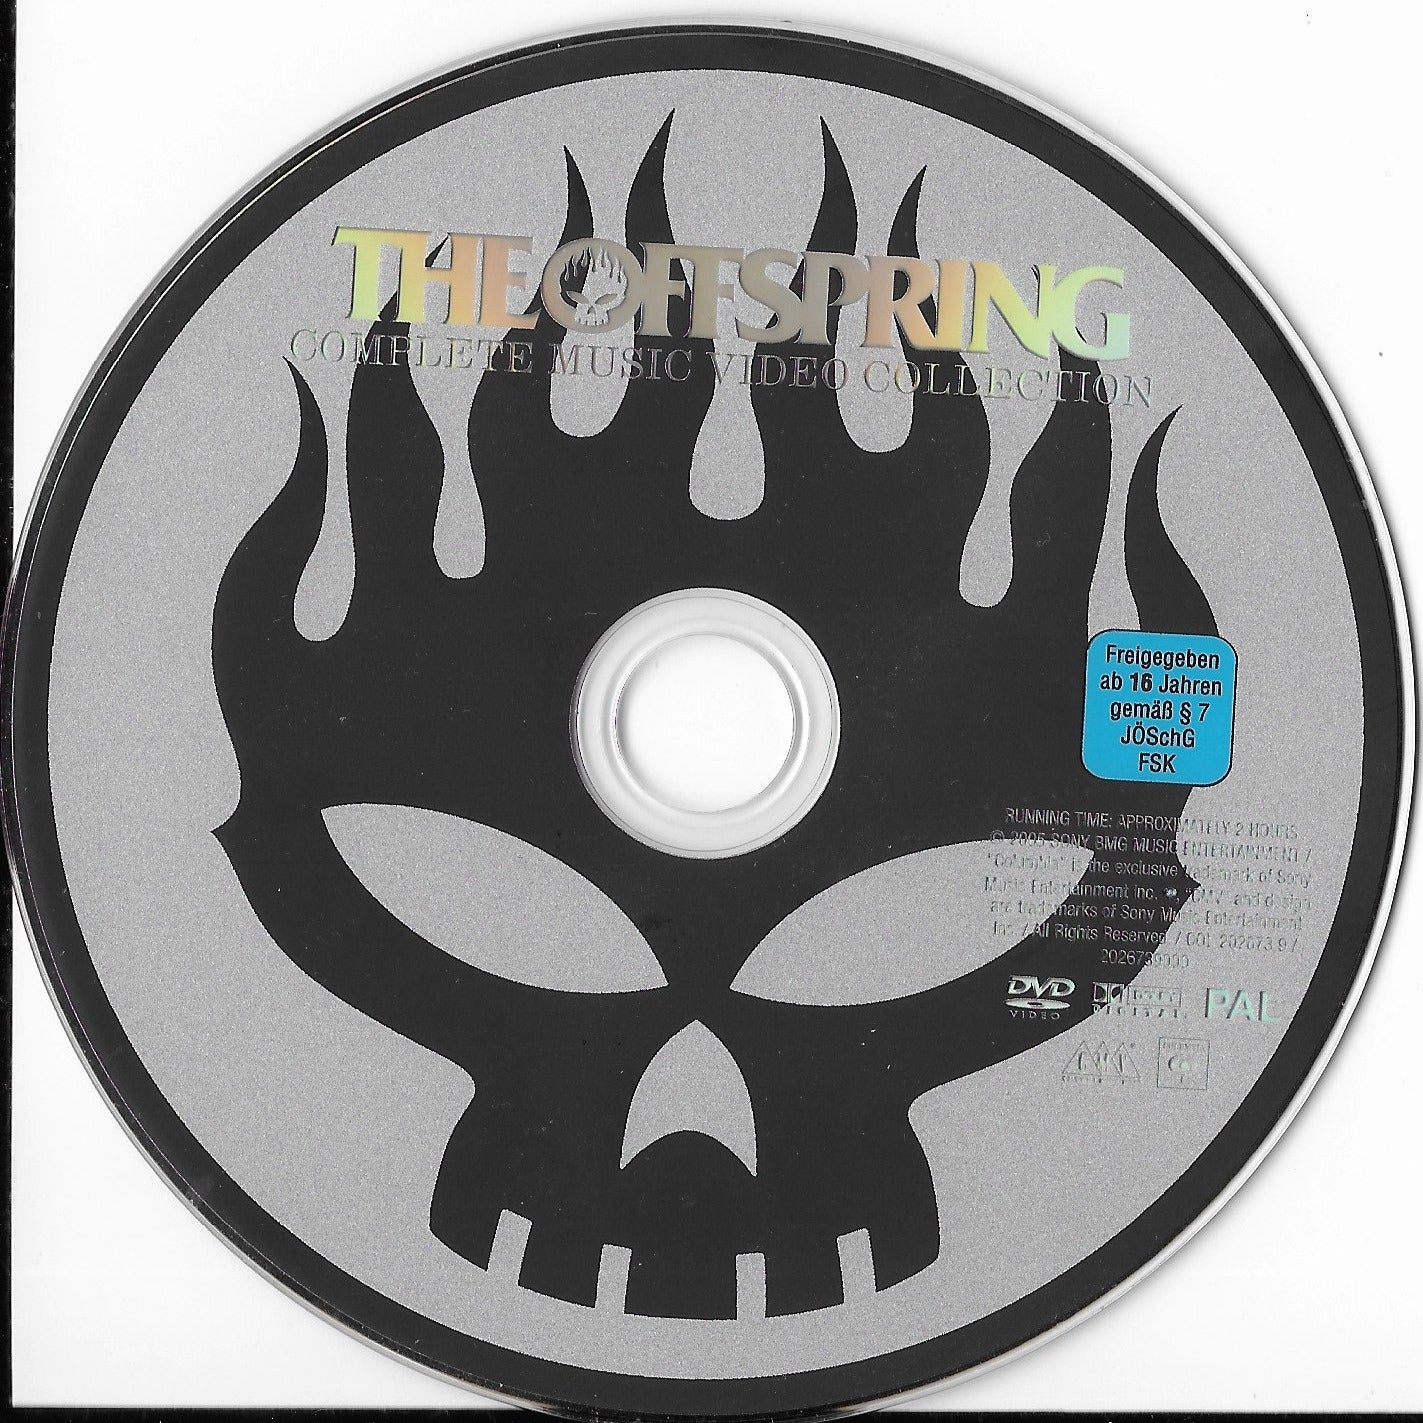 THE OFFSPRING - Complete Music Video Collection